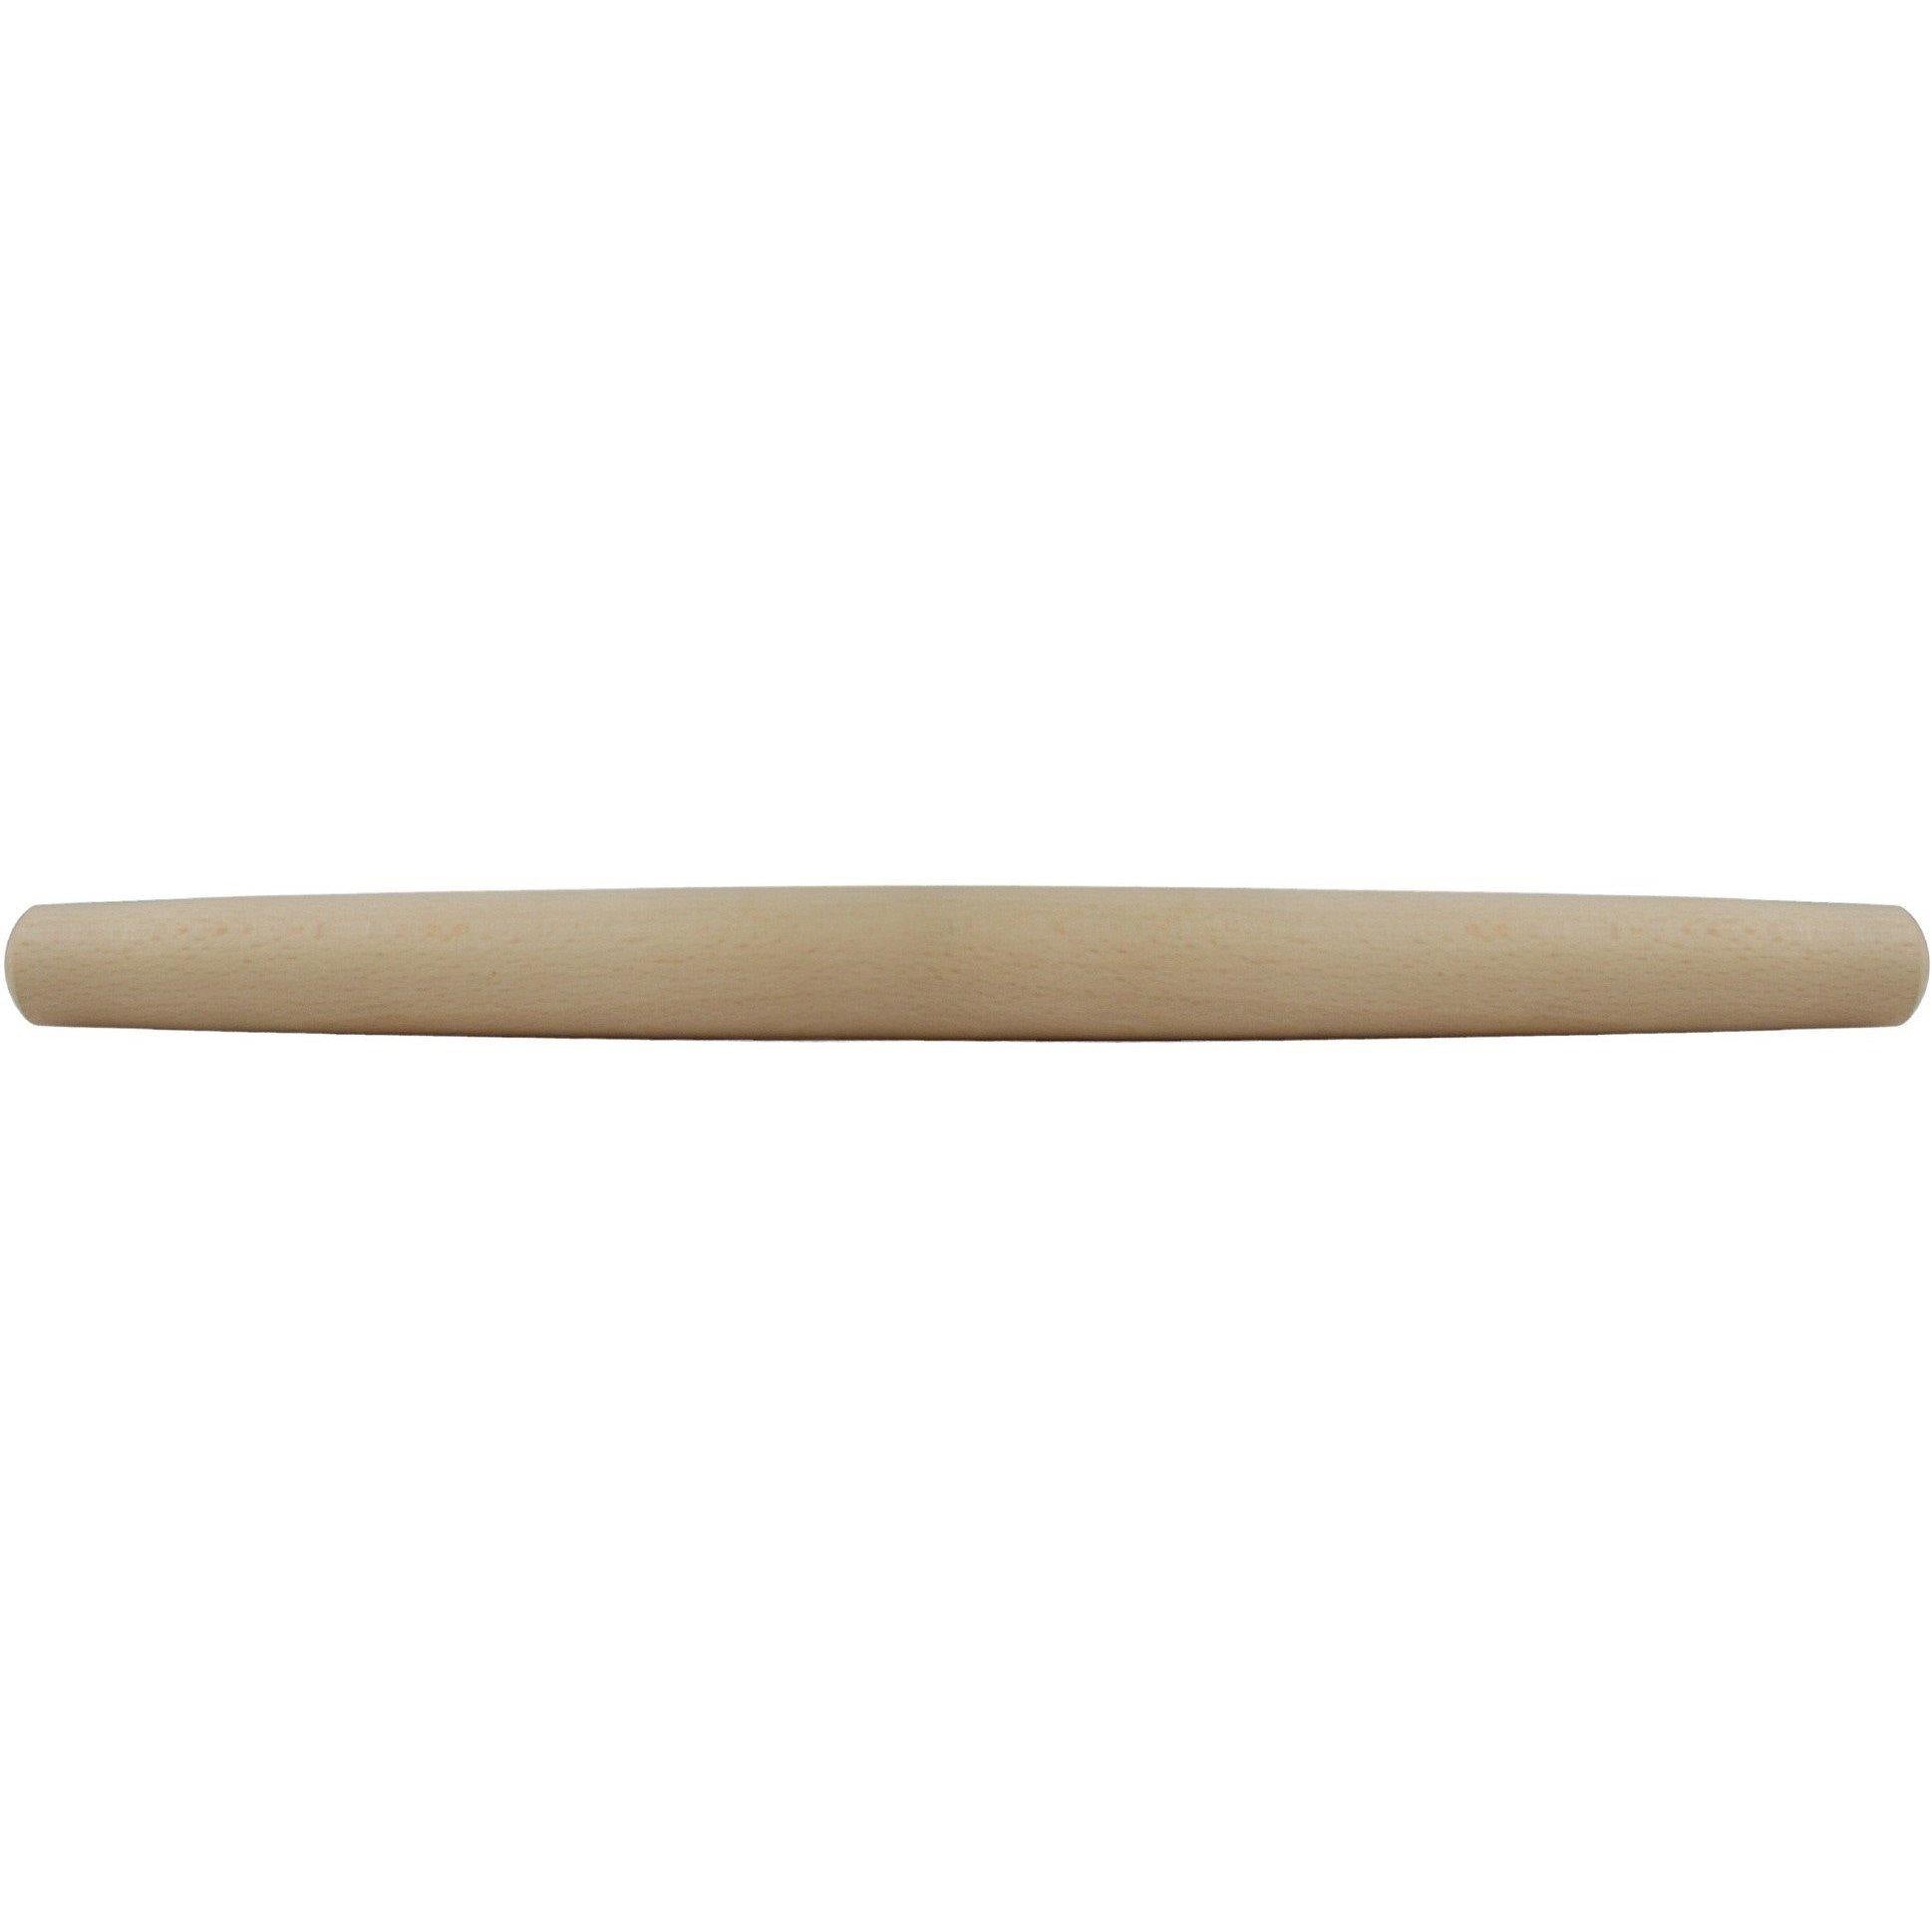 Tapered Rolling Pin - Pasta Kitchen (tutto pasta)